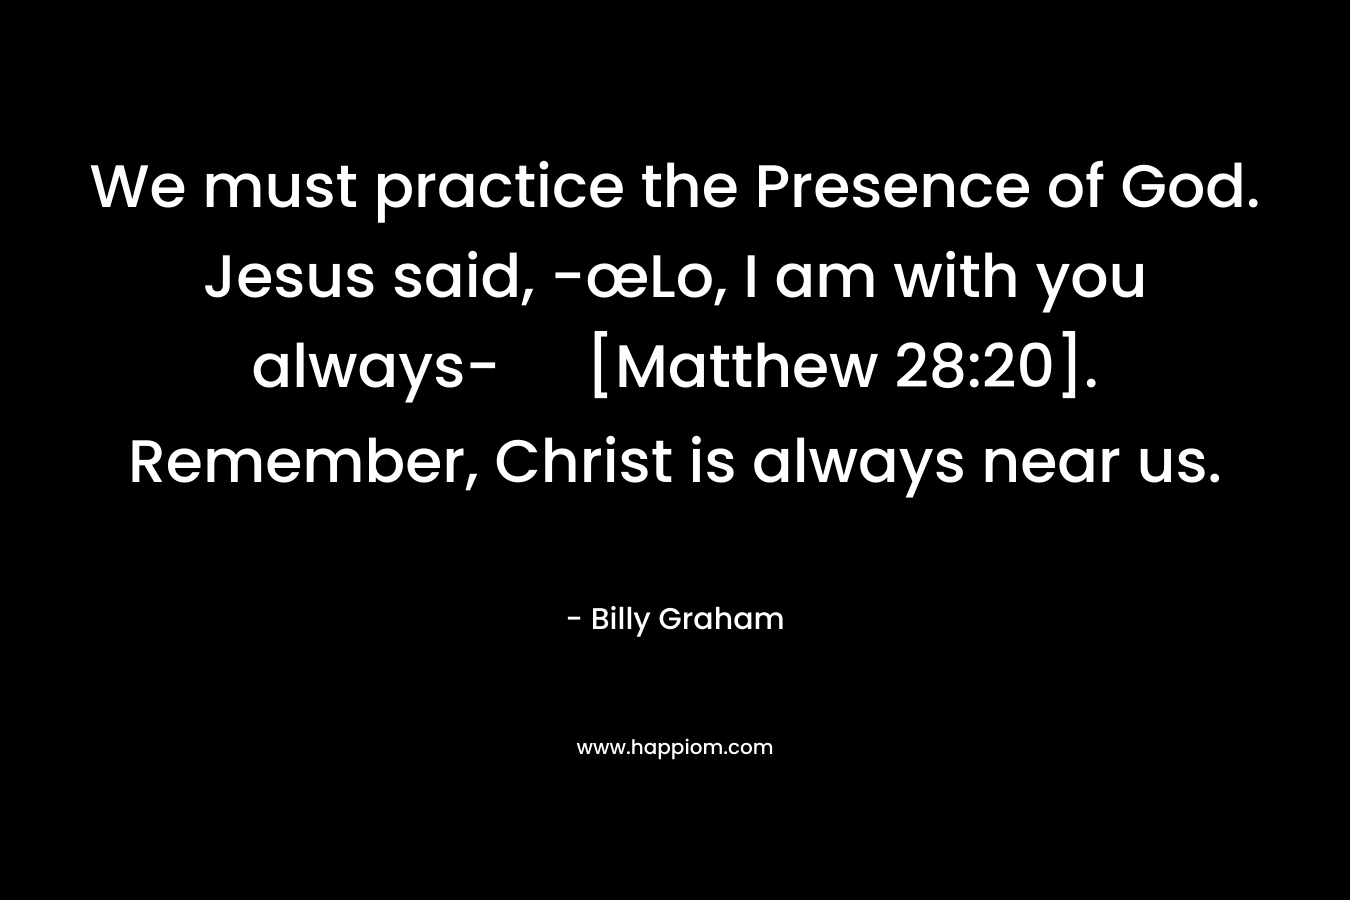 We must practice the Presence of God. Jesus said, -œLo, I am with you always- [Matthew 28:20]. Remember, Christ is always near us.